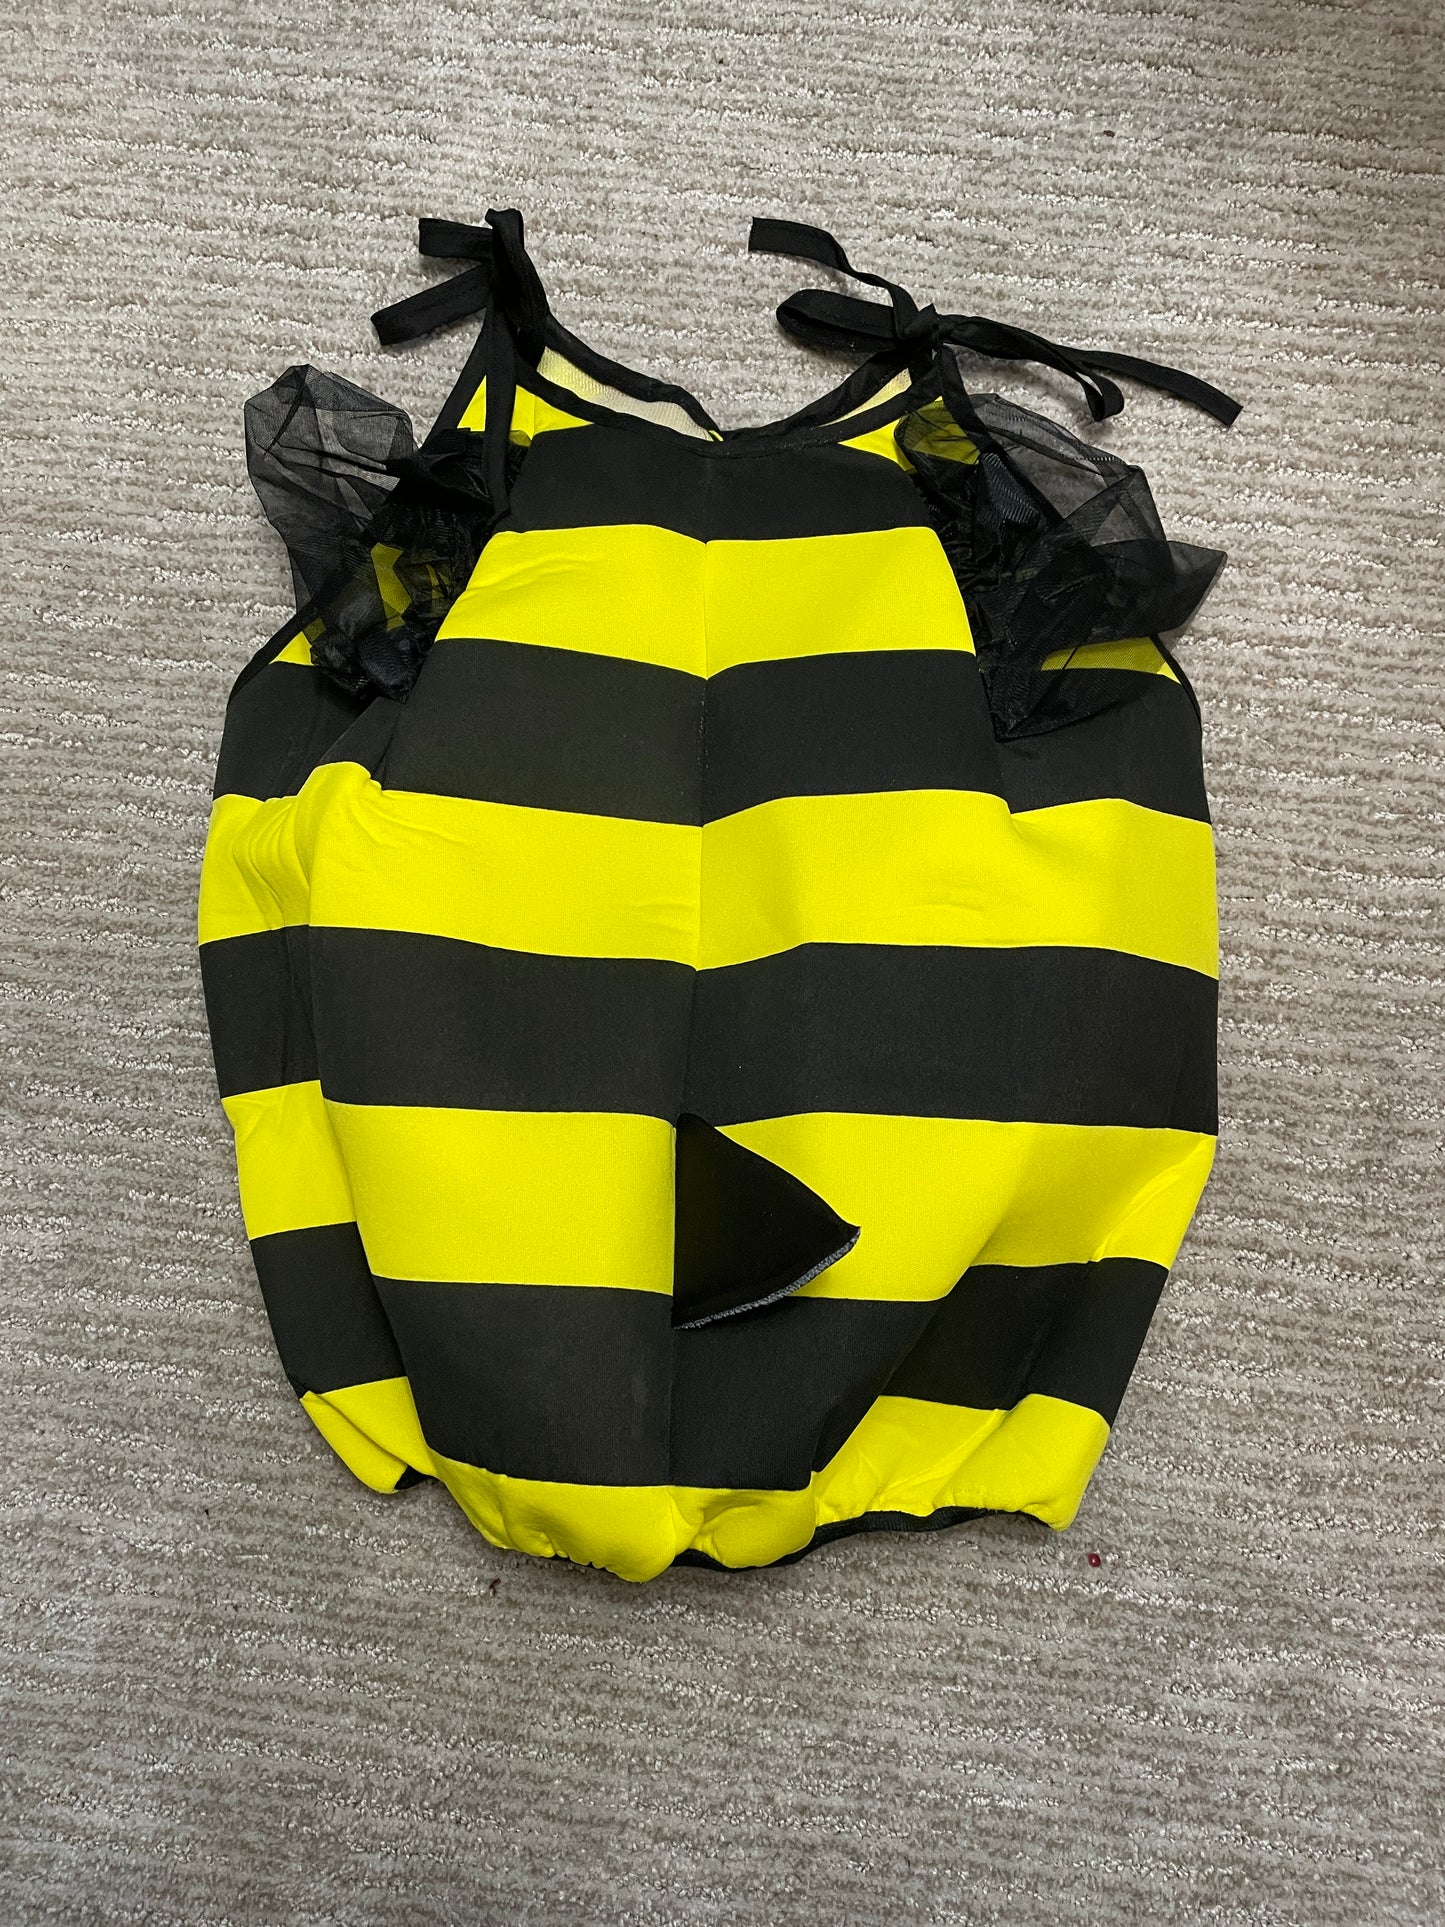 Bumblebee for Toddlers